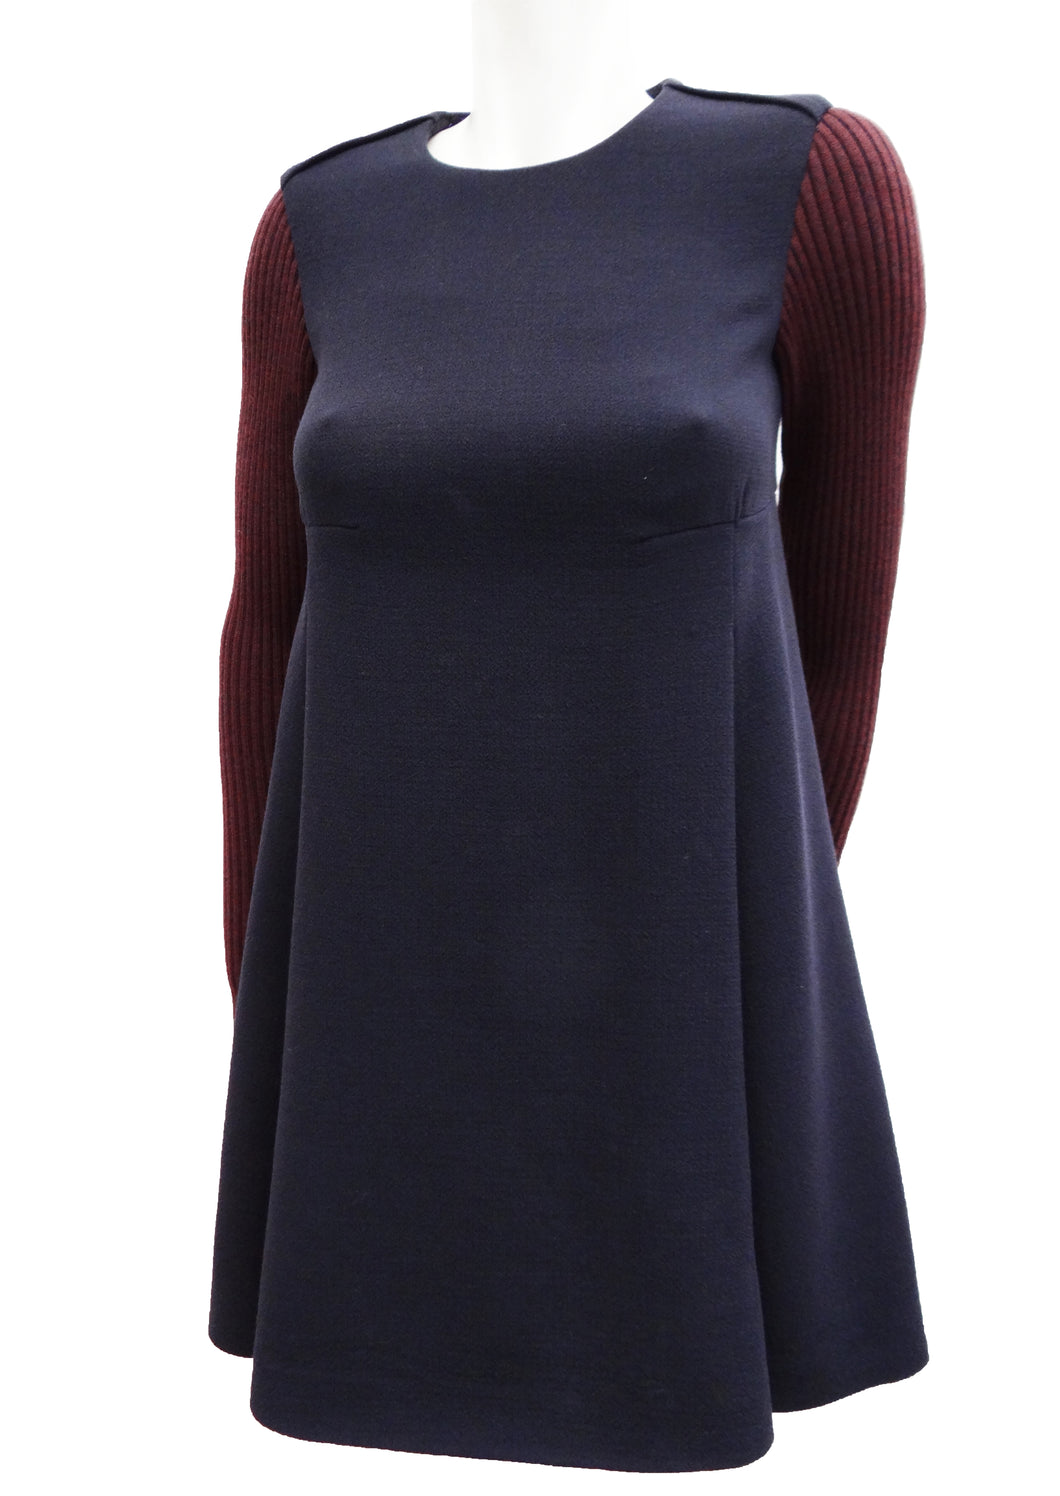 Cacharel Trapeze Dress in Navy Wool with Contrast Knitted Sleeves, UK8